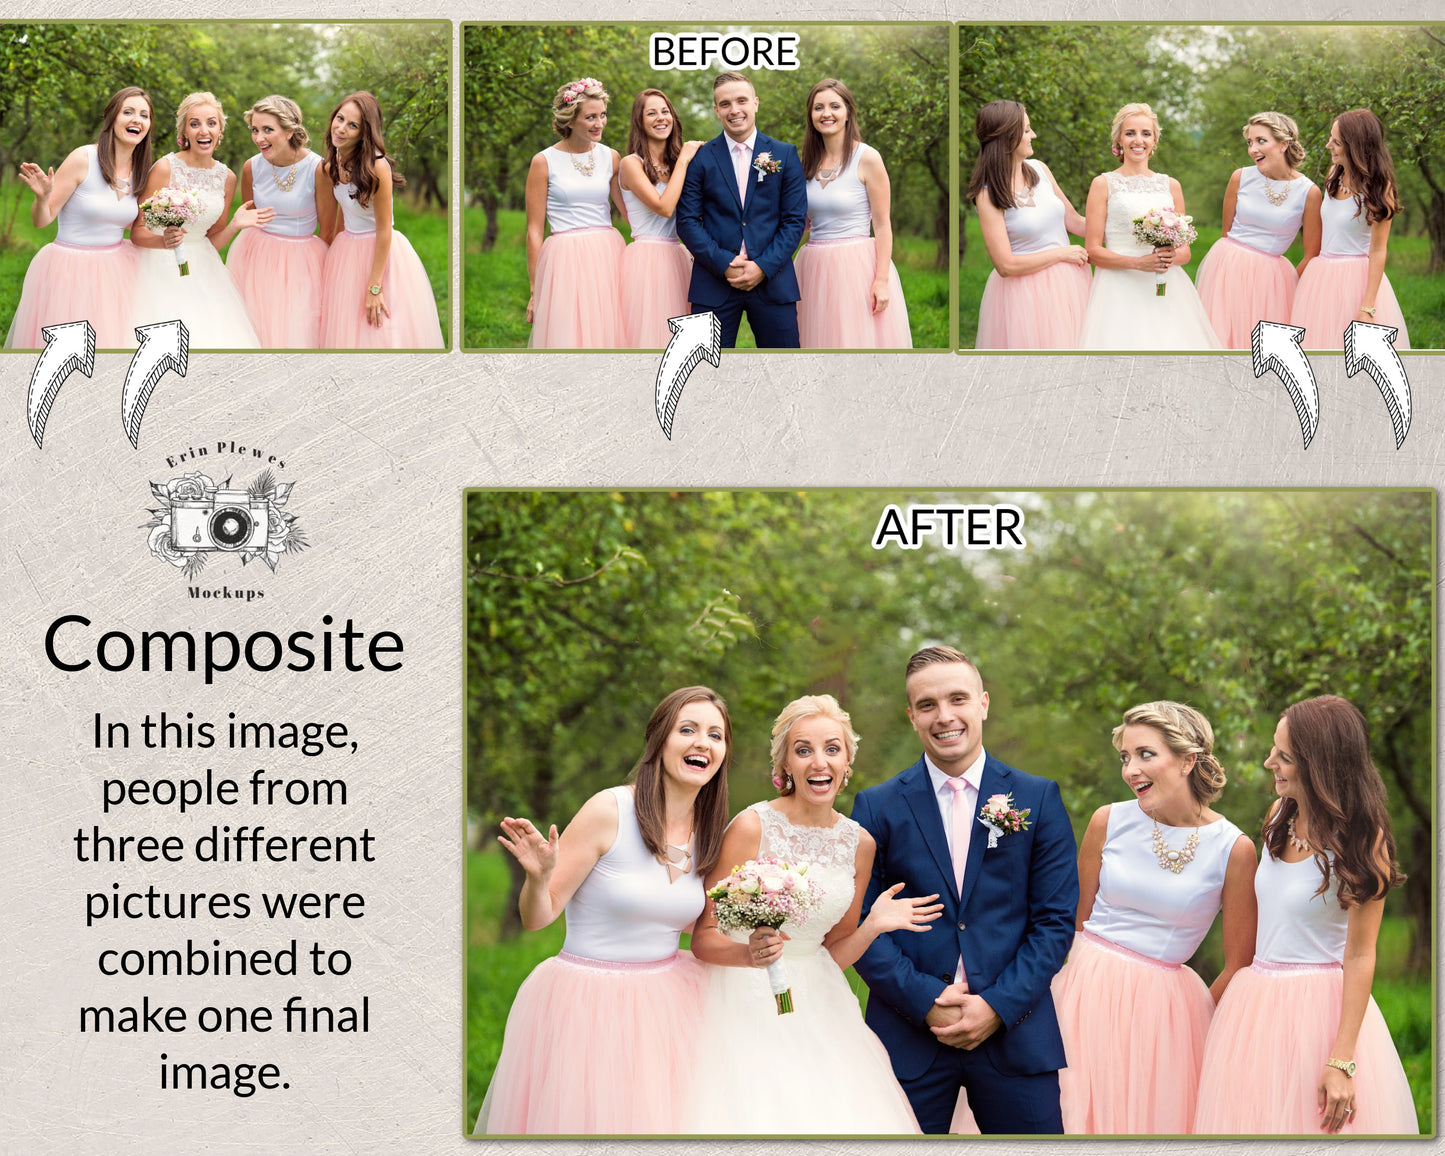 Professional Photo Editing & Photoshop Services: Object Removal, Background Editing & More